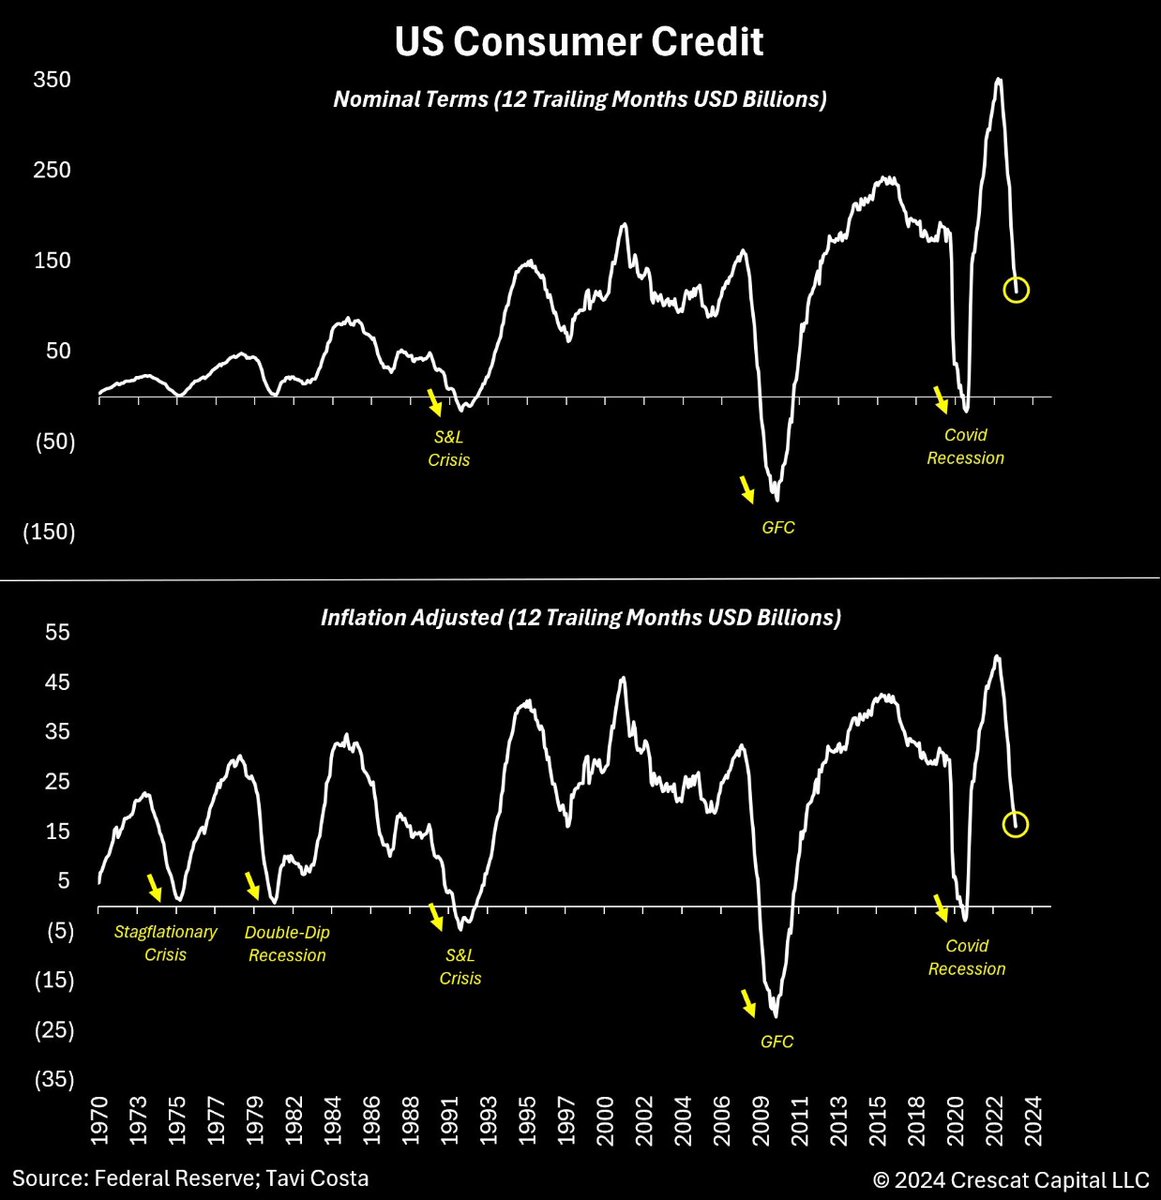 Households today are less leveraged compared to past bubbles like housing, but low savings rates and costly debt hinder consumers from increasing leverage. 📉 The cyclicality of consumer credit is apparent, hinting at a potential downturn ahead. 🔄 #ConsumerCredit #Economy